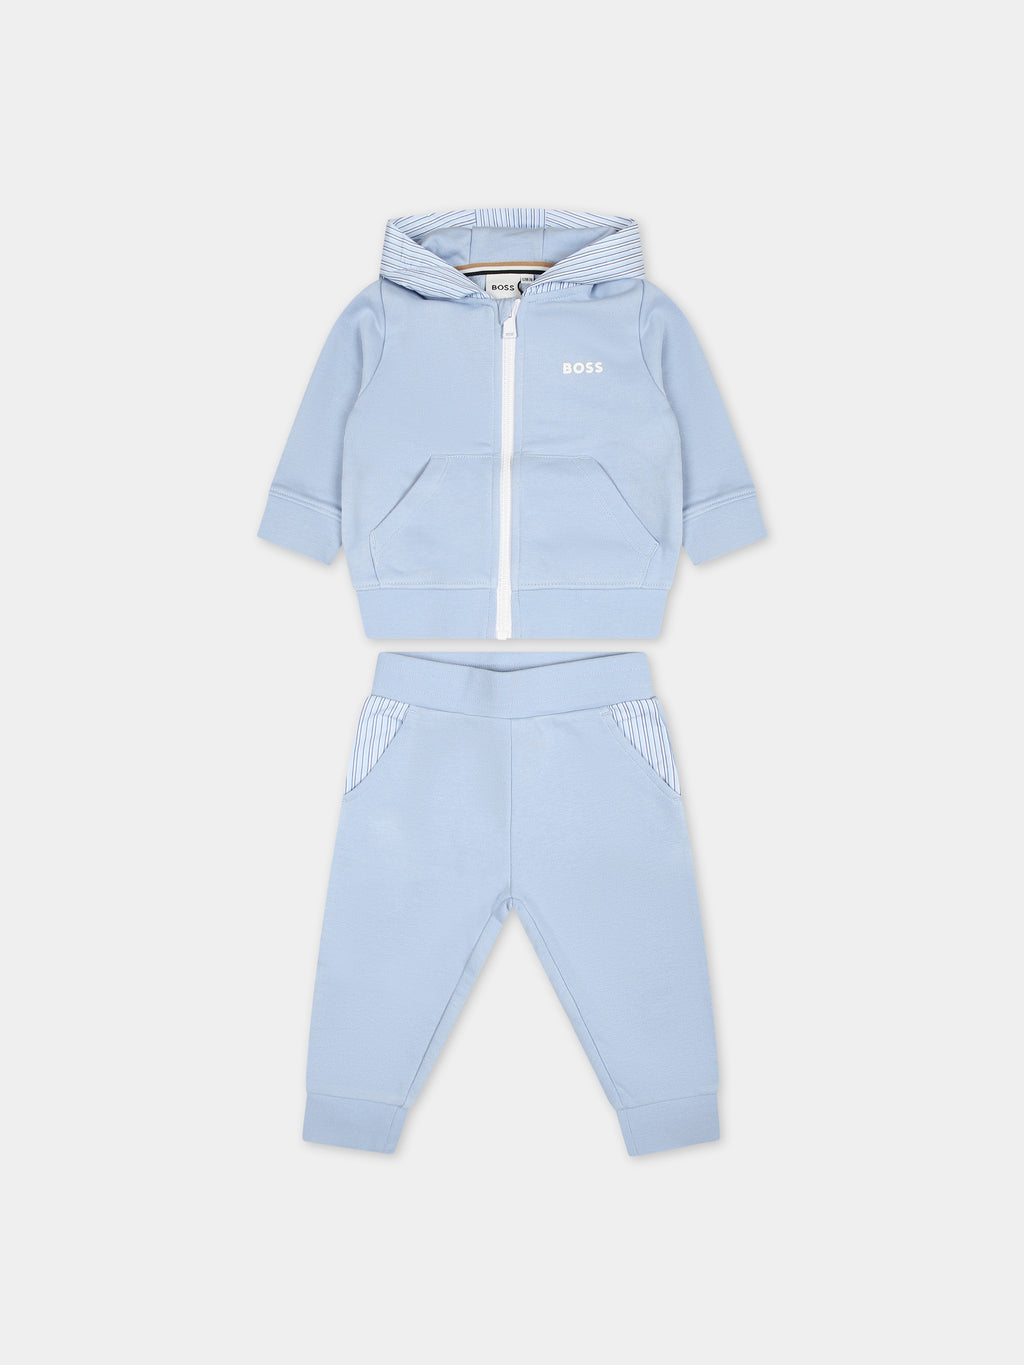 Light blue suit for baby boy with logo